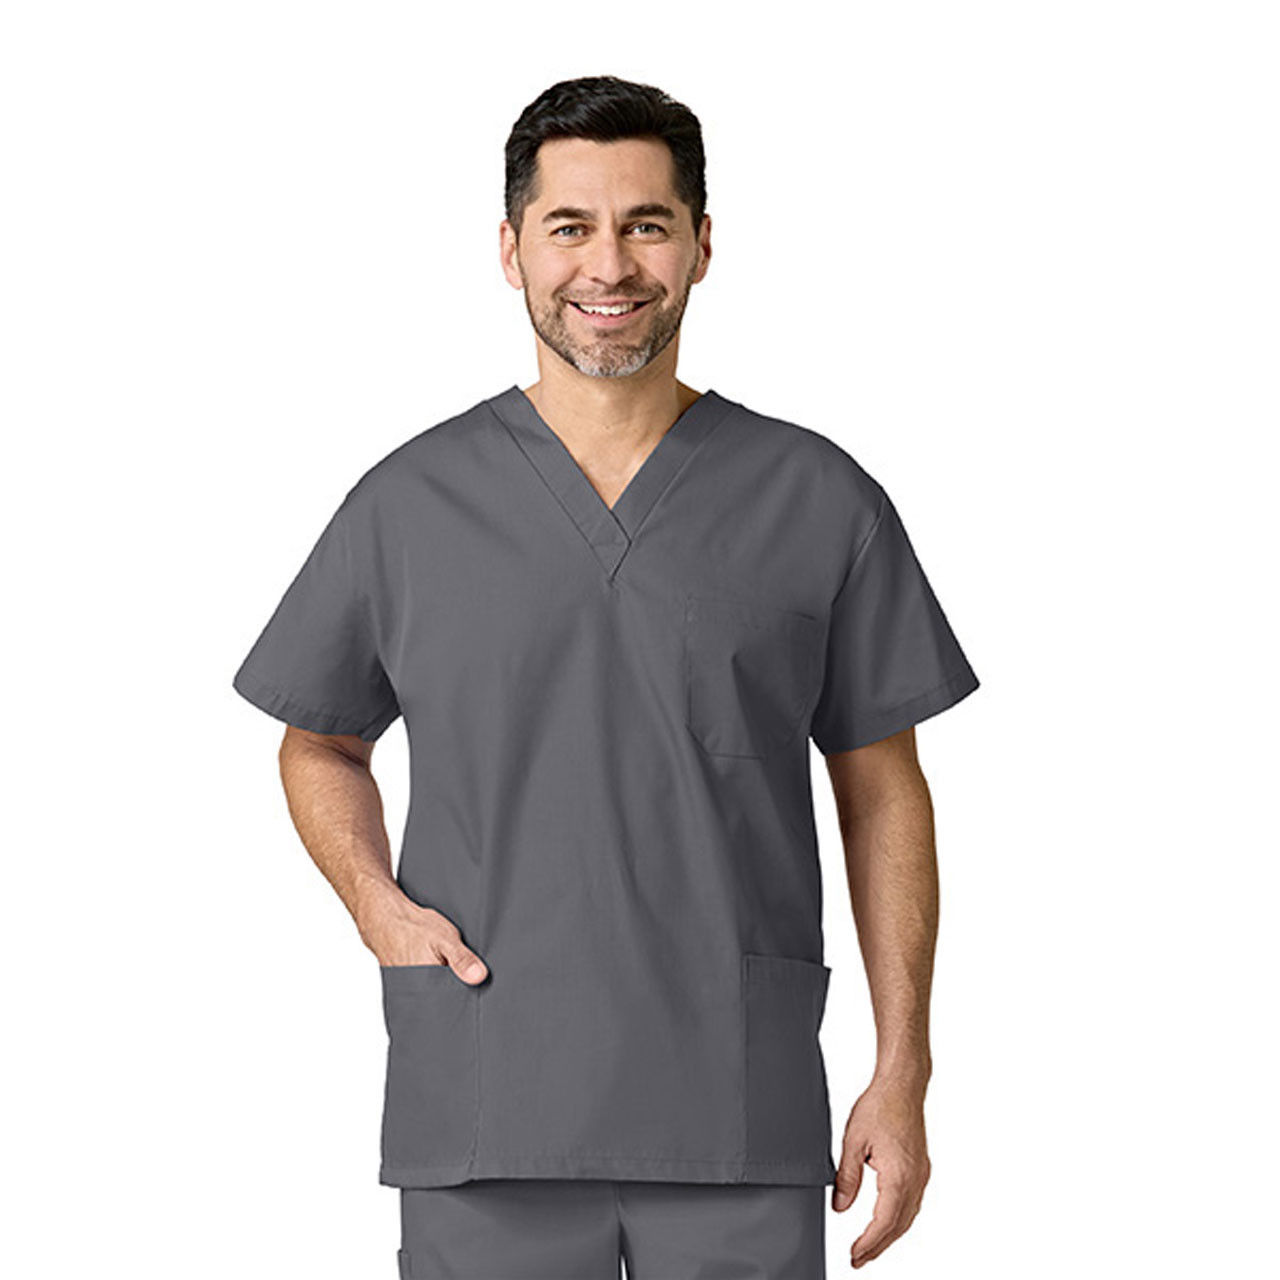 Is the Fashion Seal Scrub Top breathable?